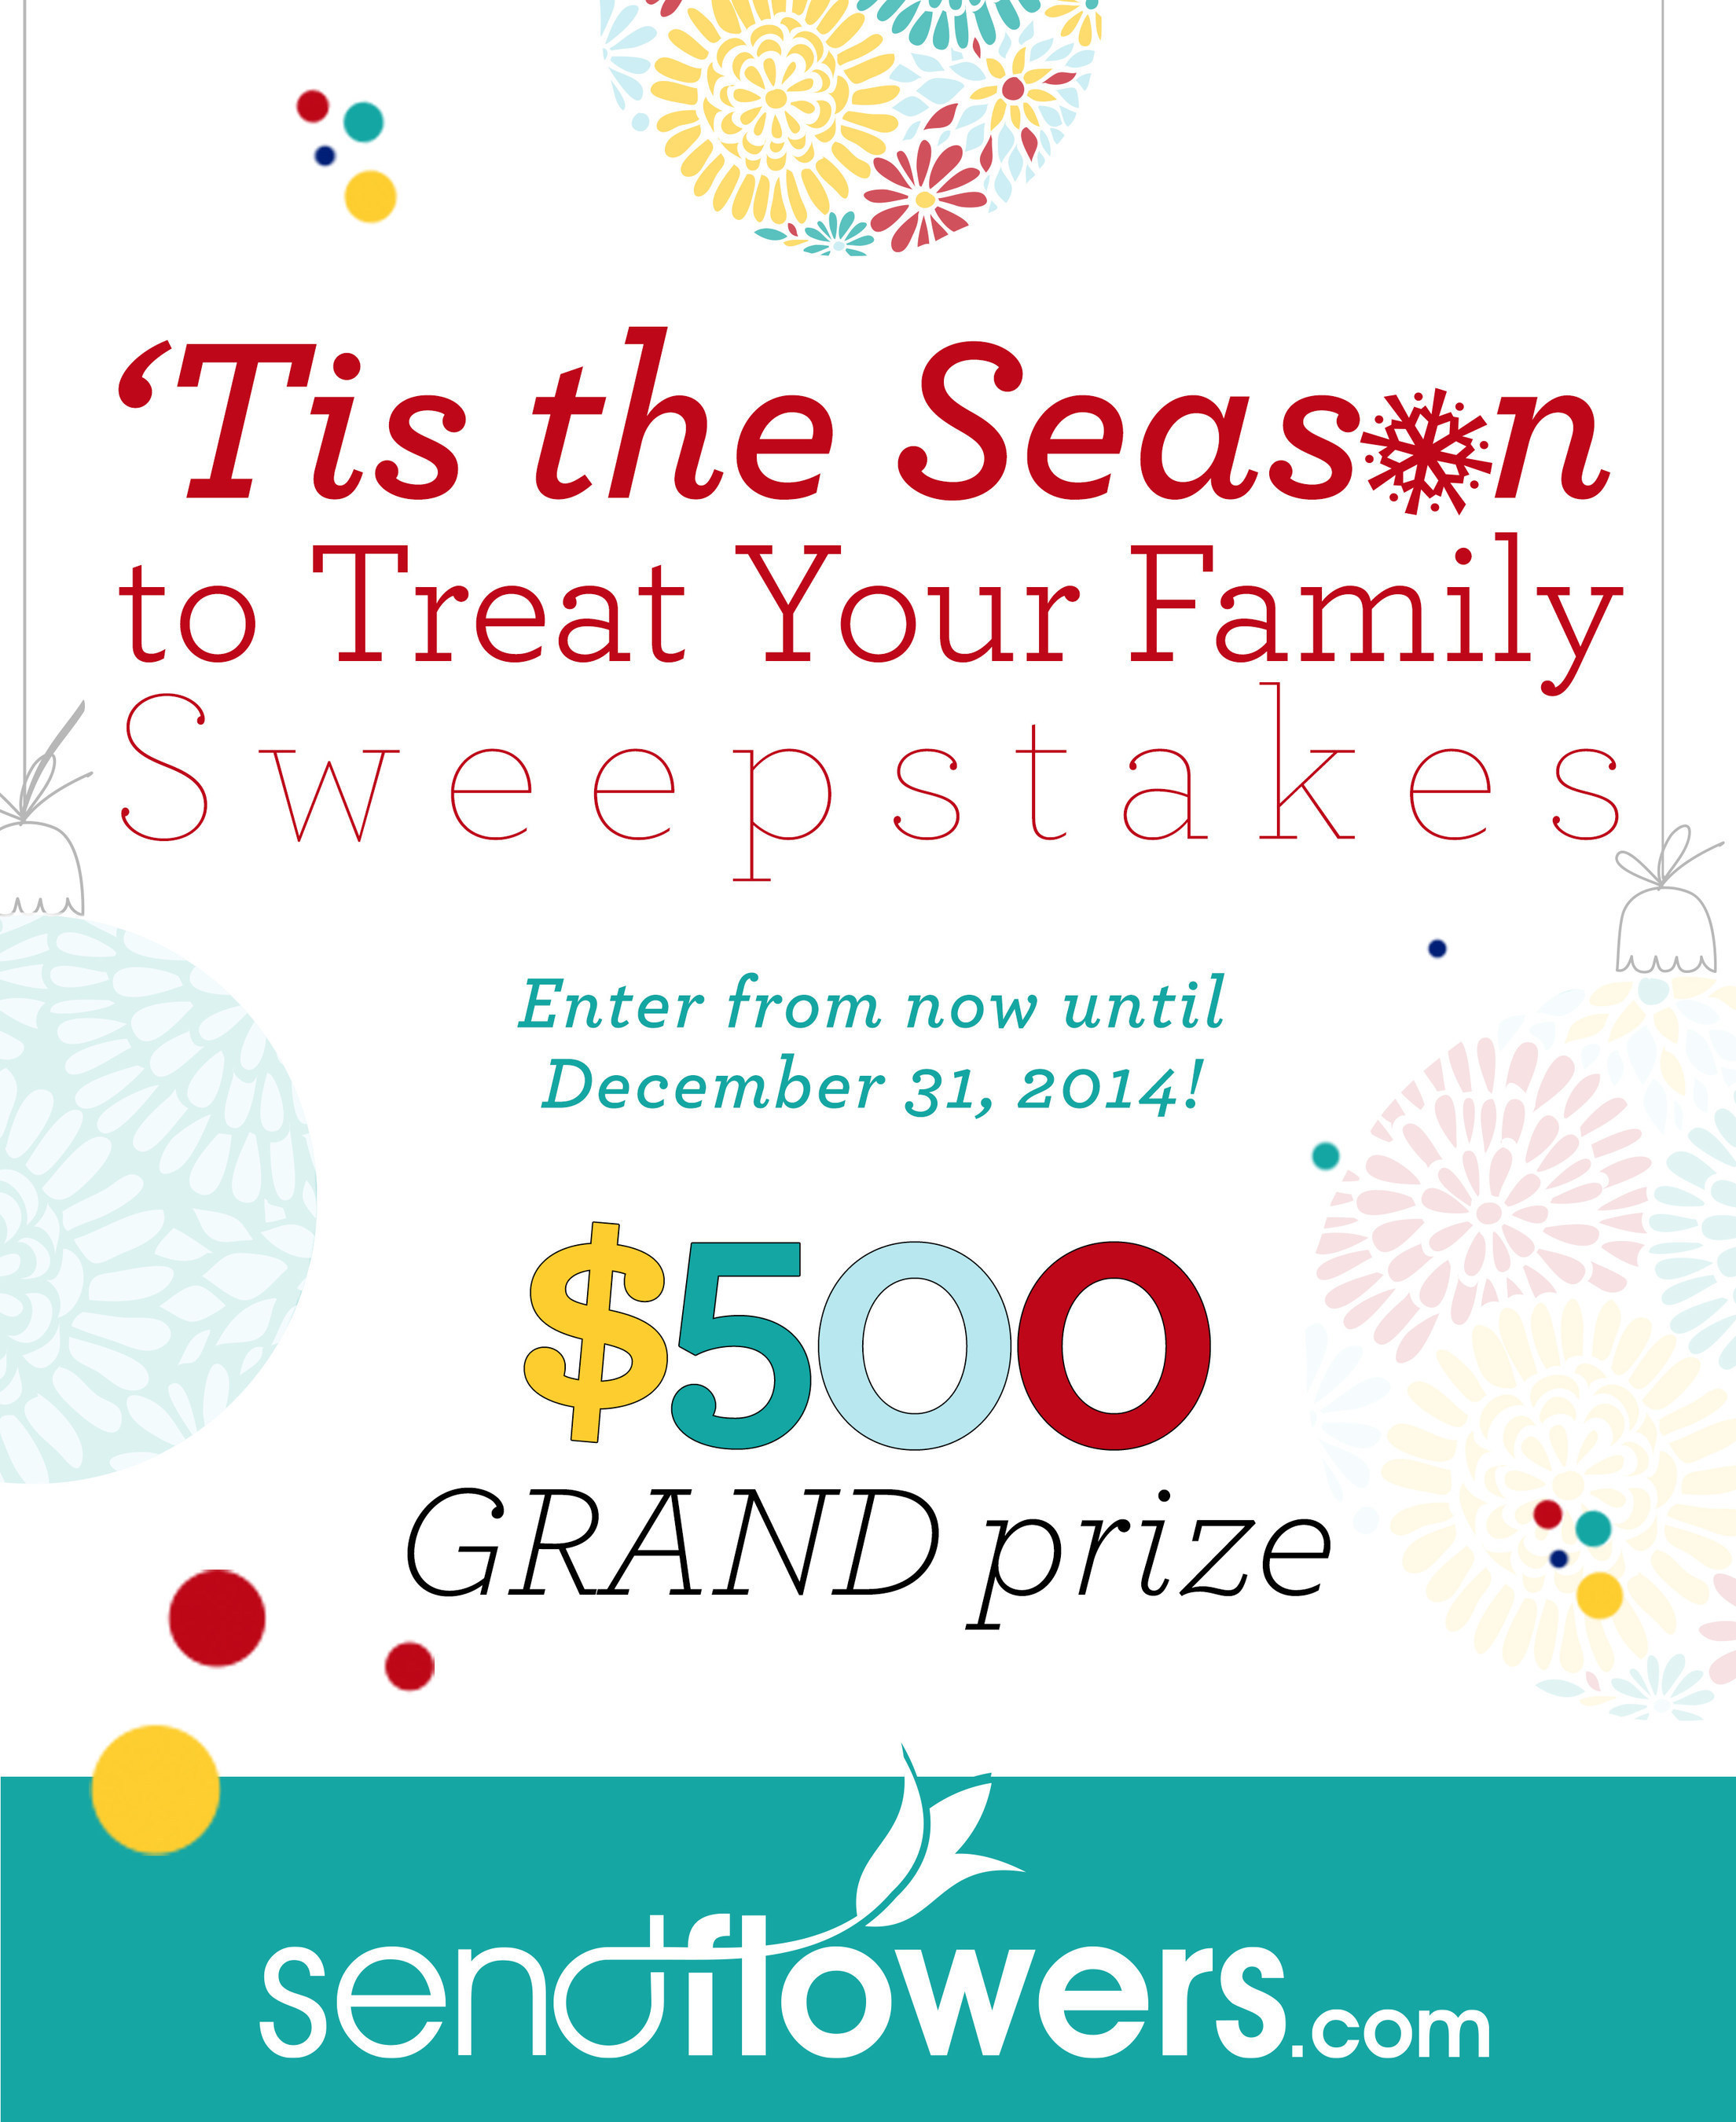 Send Flowers Launches the 'Tis the Season to Treat Your Family Sweepstakes